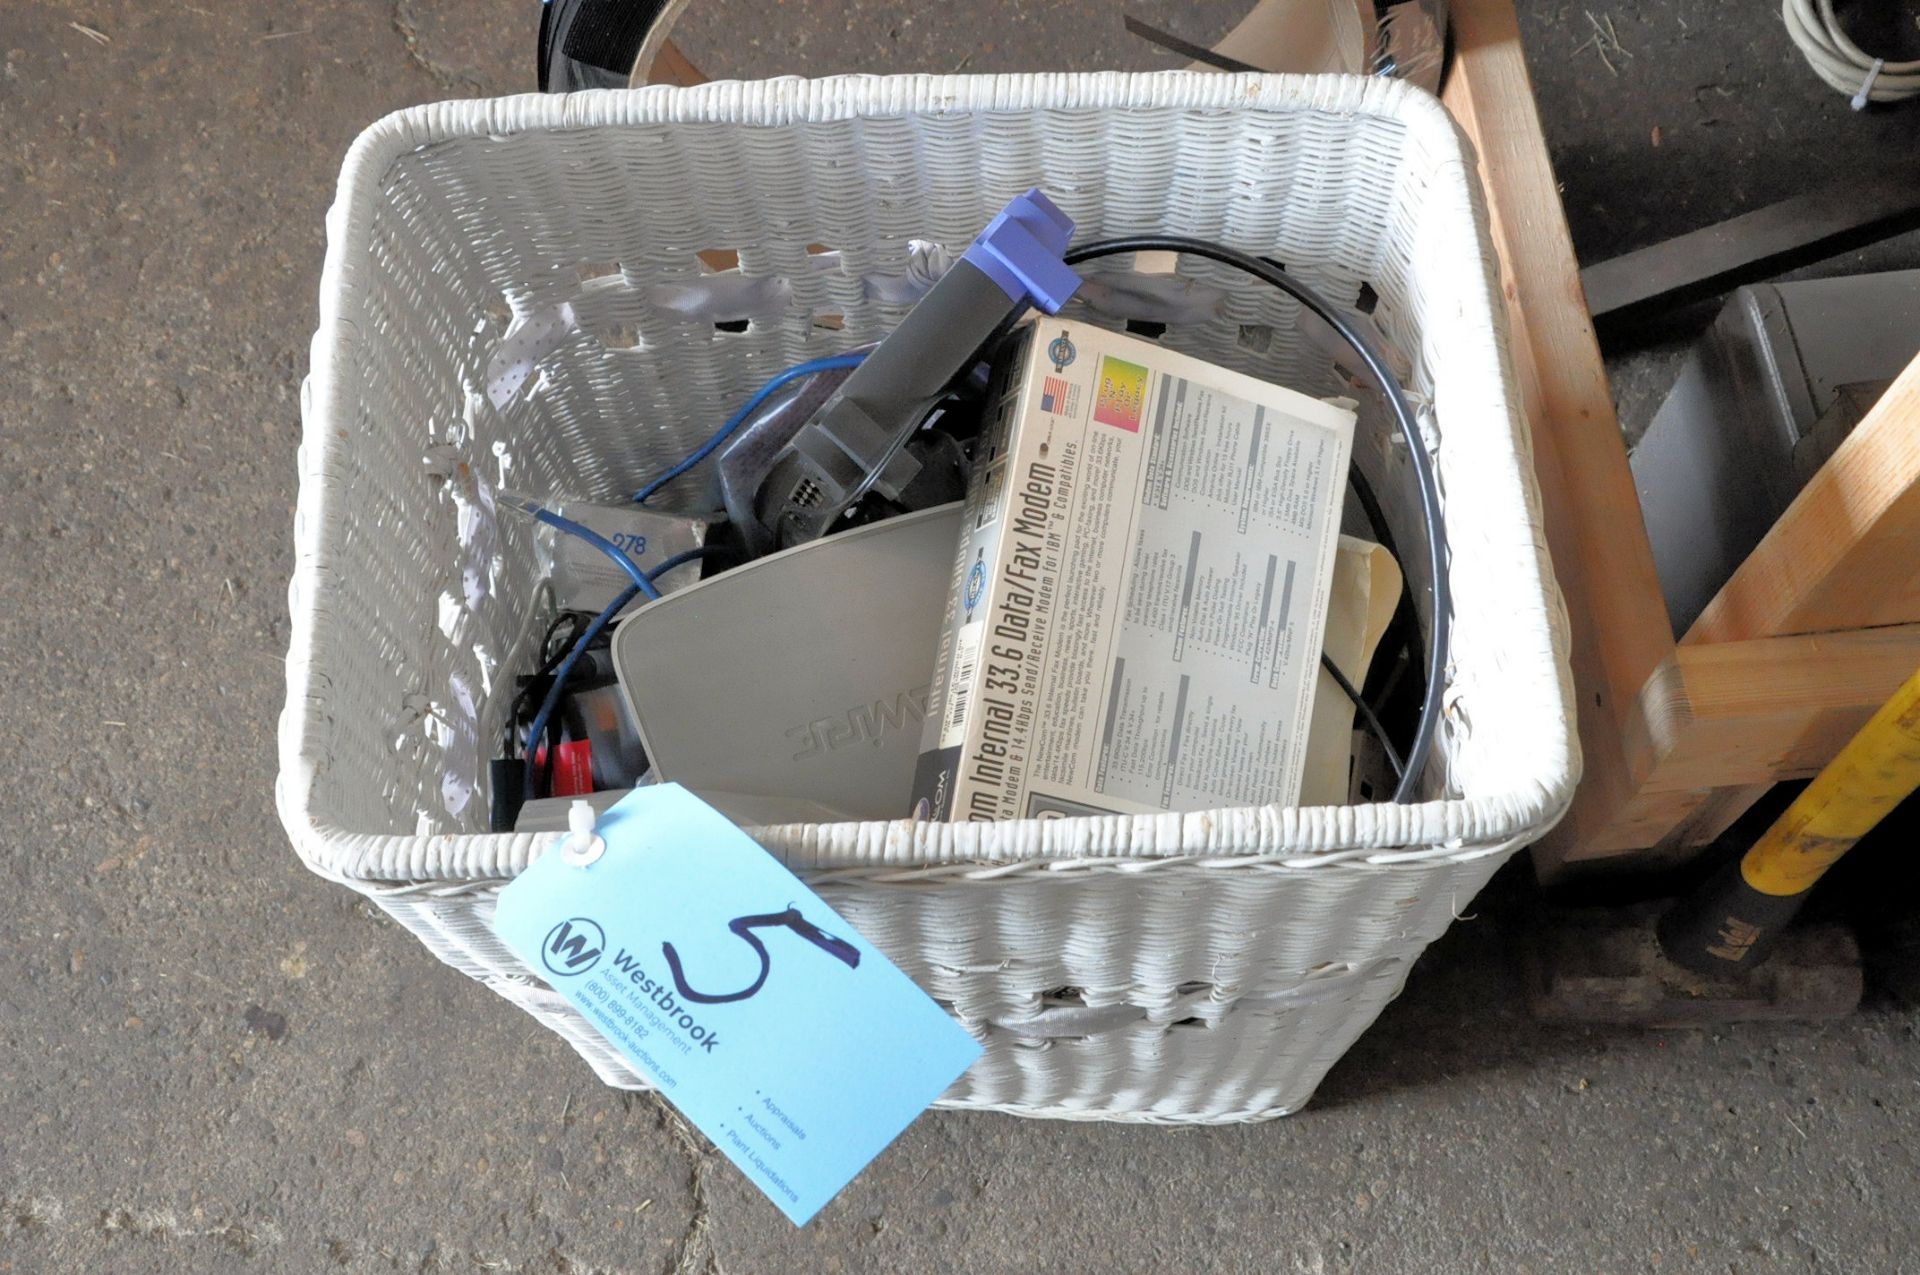 Lot-Computer Cables, Router, Modem, etc. in (1) Basket